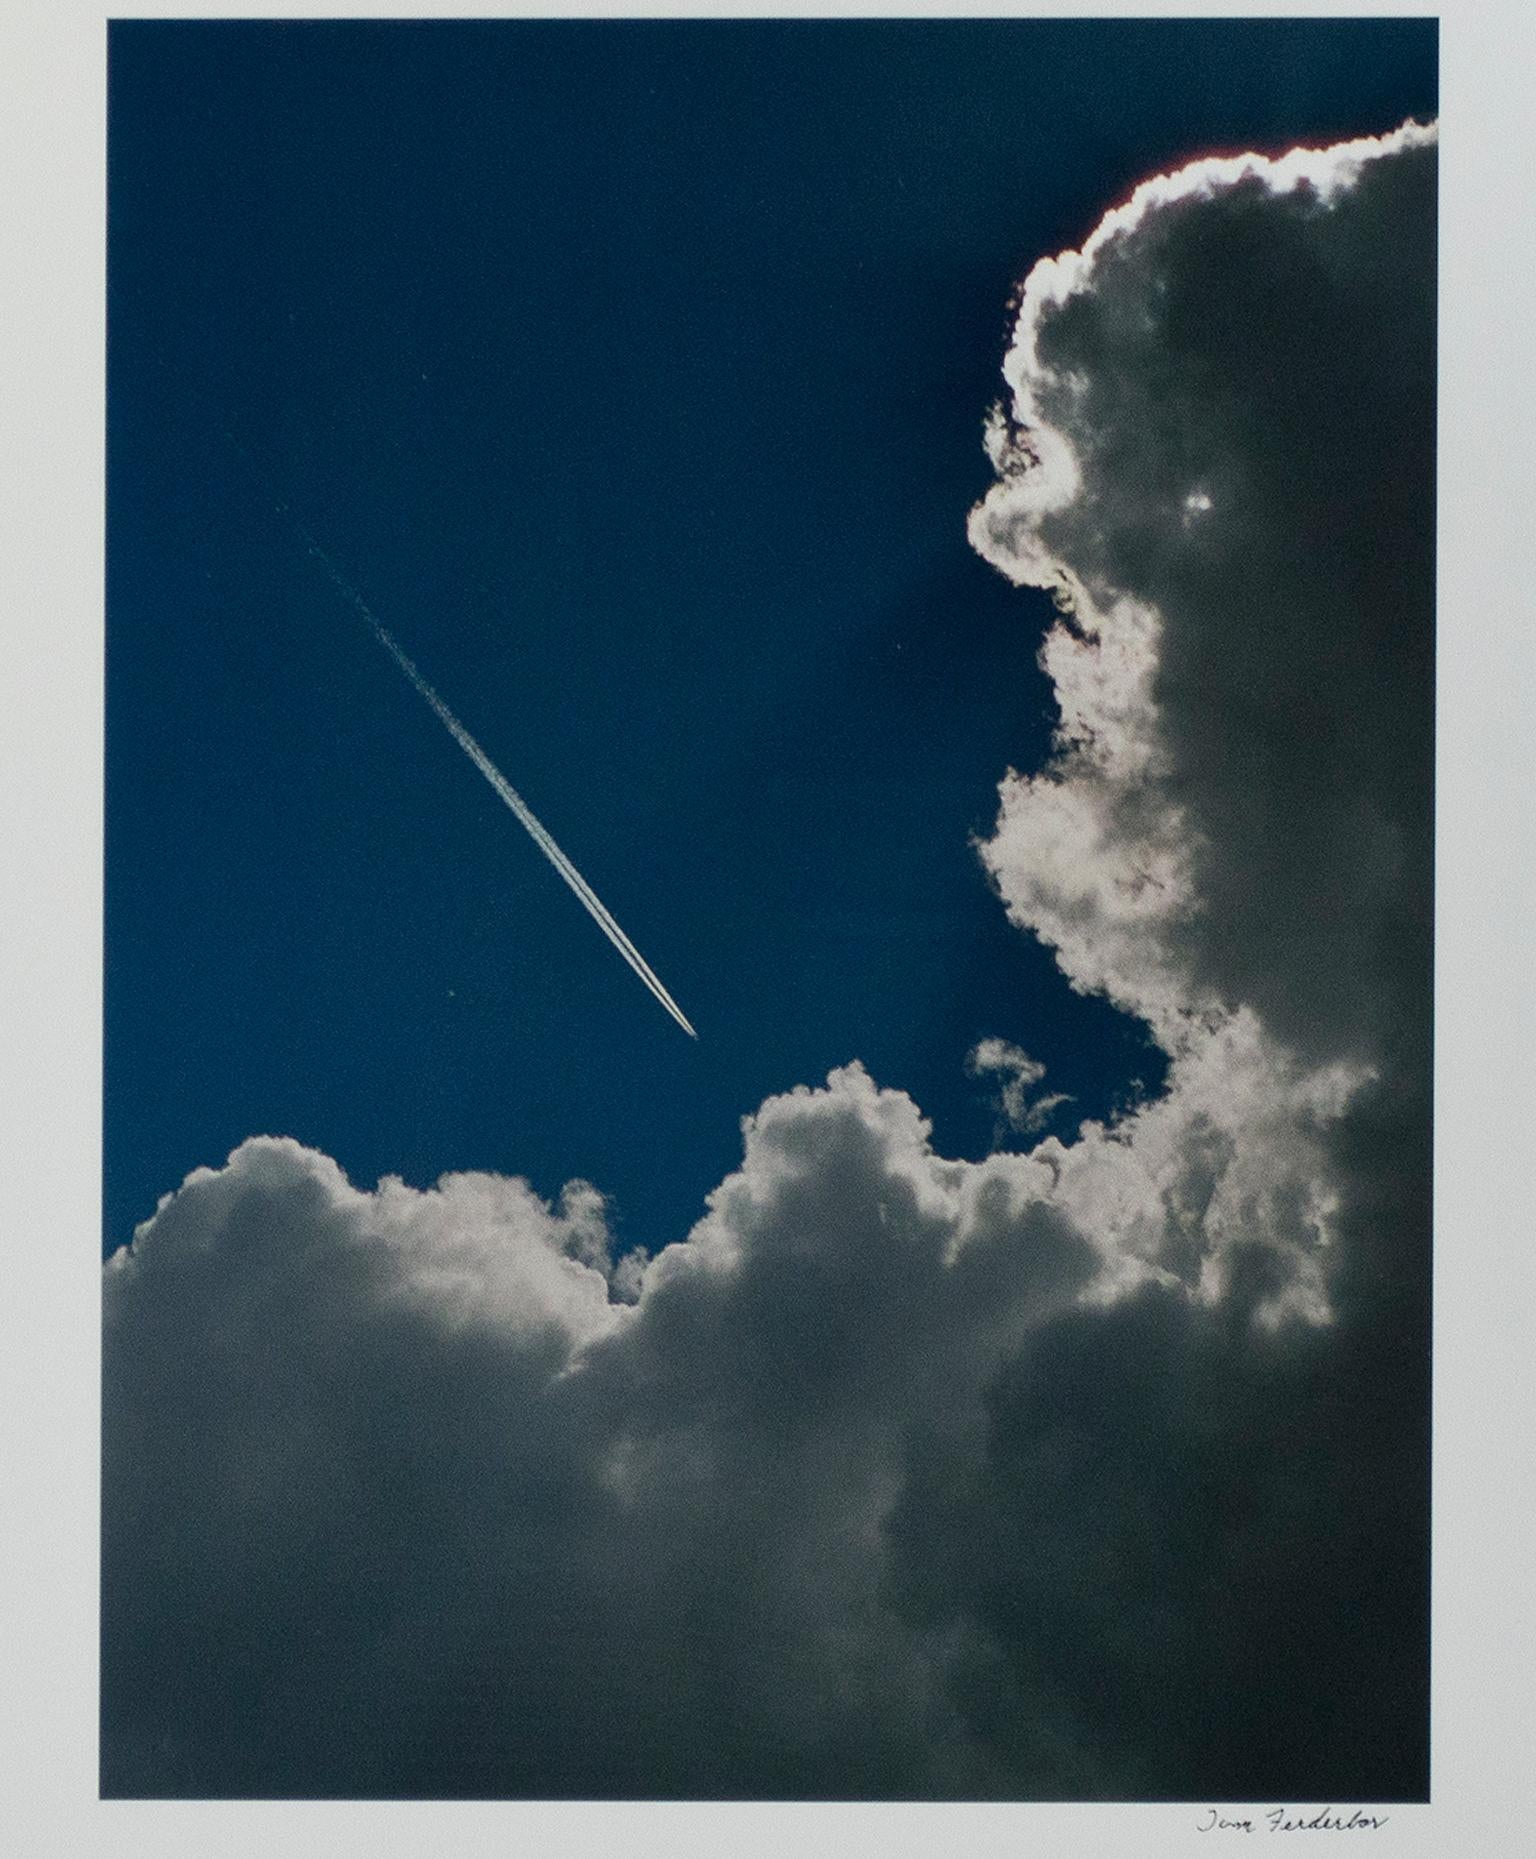 "Plane Into Cloud, AZ" is an original color photograph by Thomas Ferderbar. The artist signed the piece lower right. It depicts an airplane flying towards a large, fluffy cloud. 

20 1/4" x 15" image
26" x 21" paper
29" x 24" frame

I wanted to